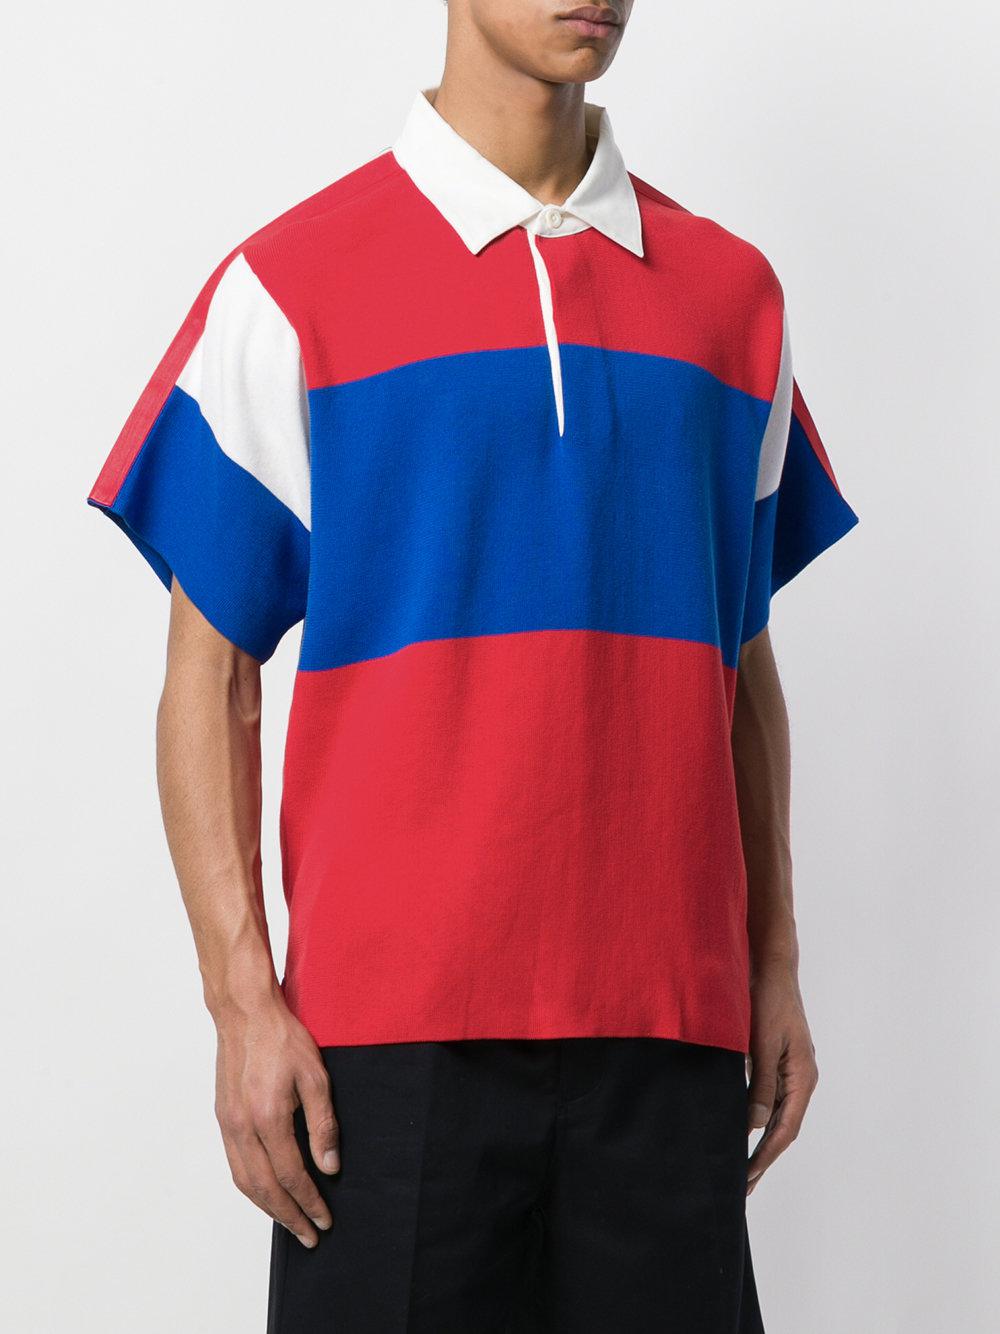 Tommy Hilfiger Oversized Rugby Polo in Red for Men - Lyst